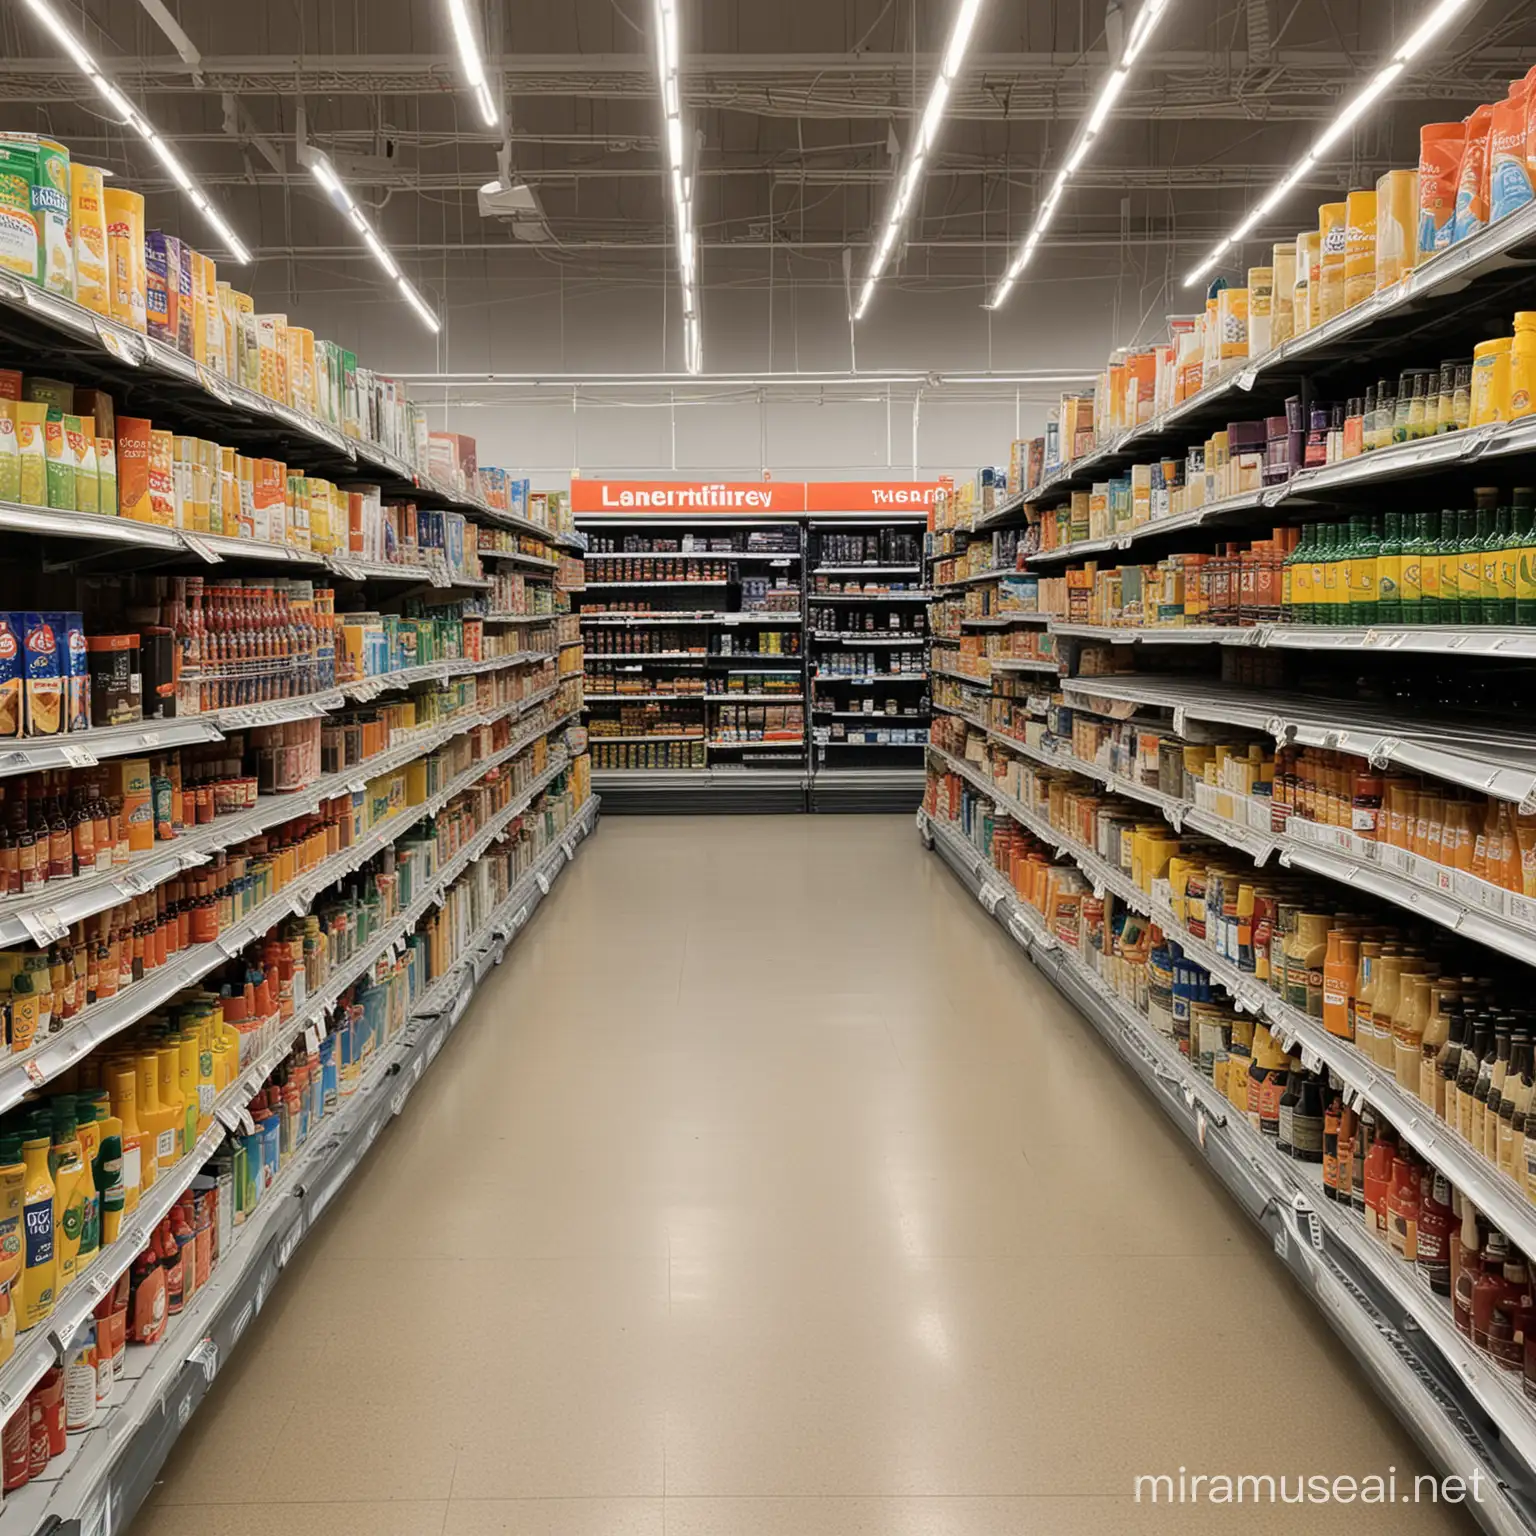 Picture of a supermarket isle full of products on shelves